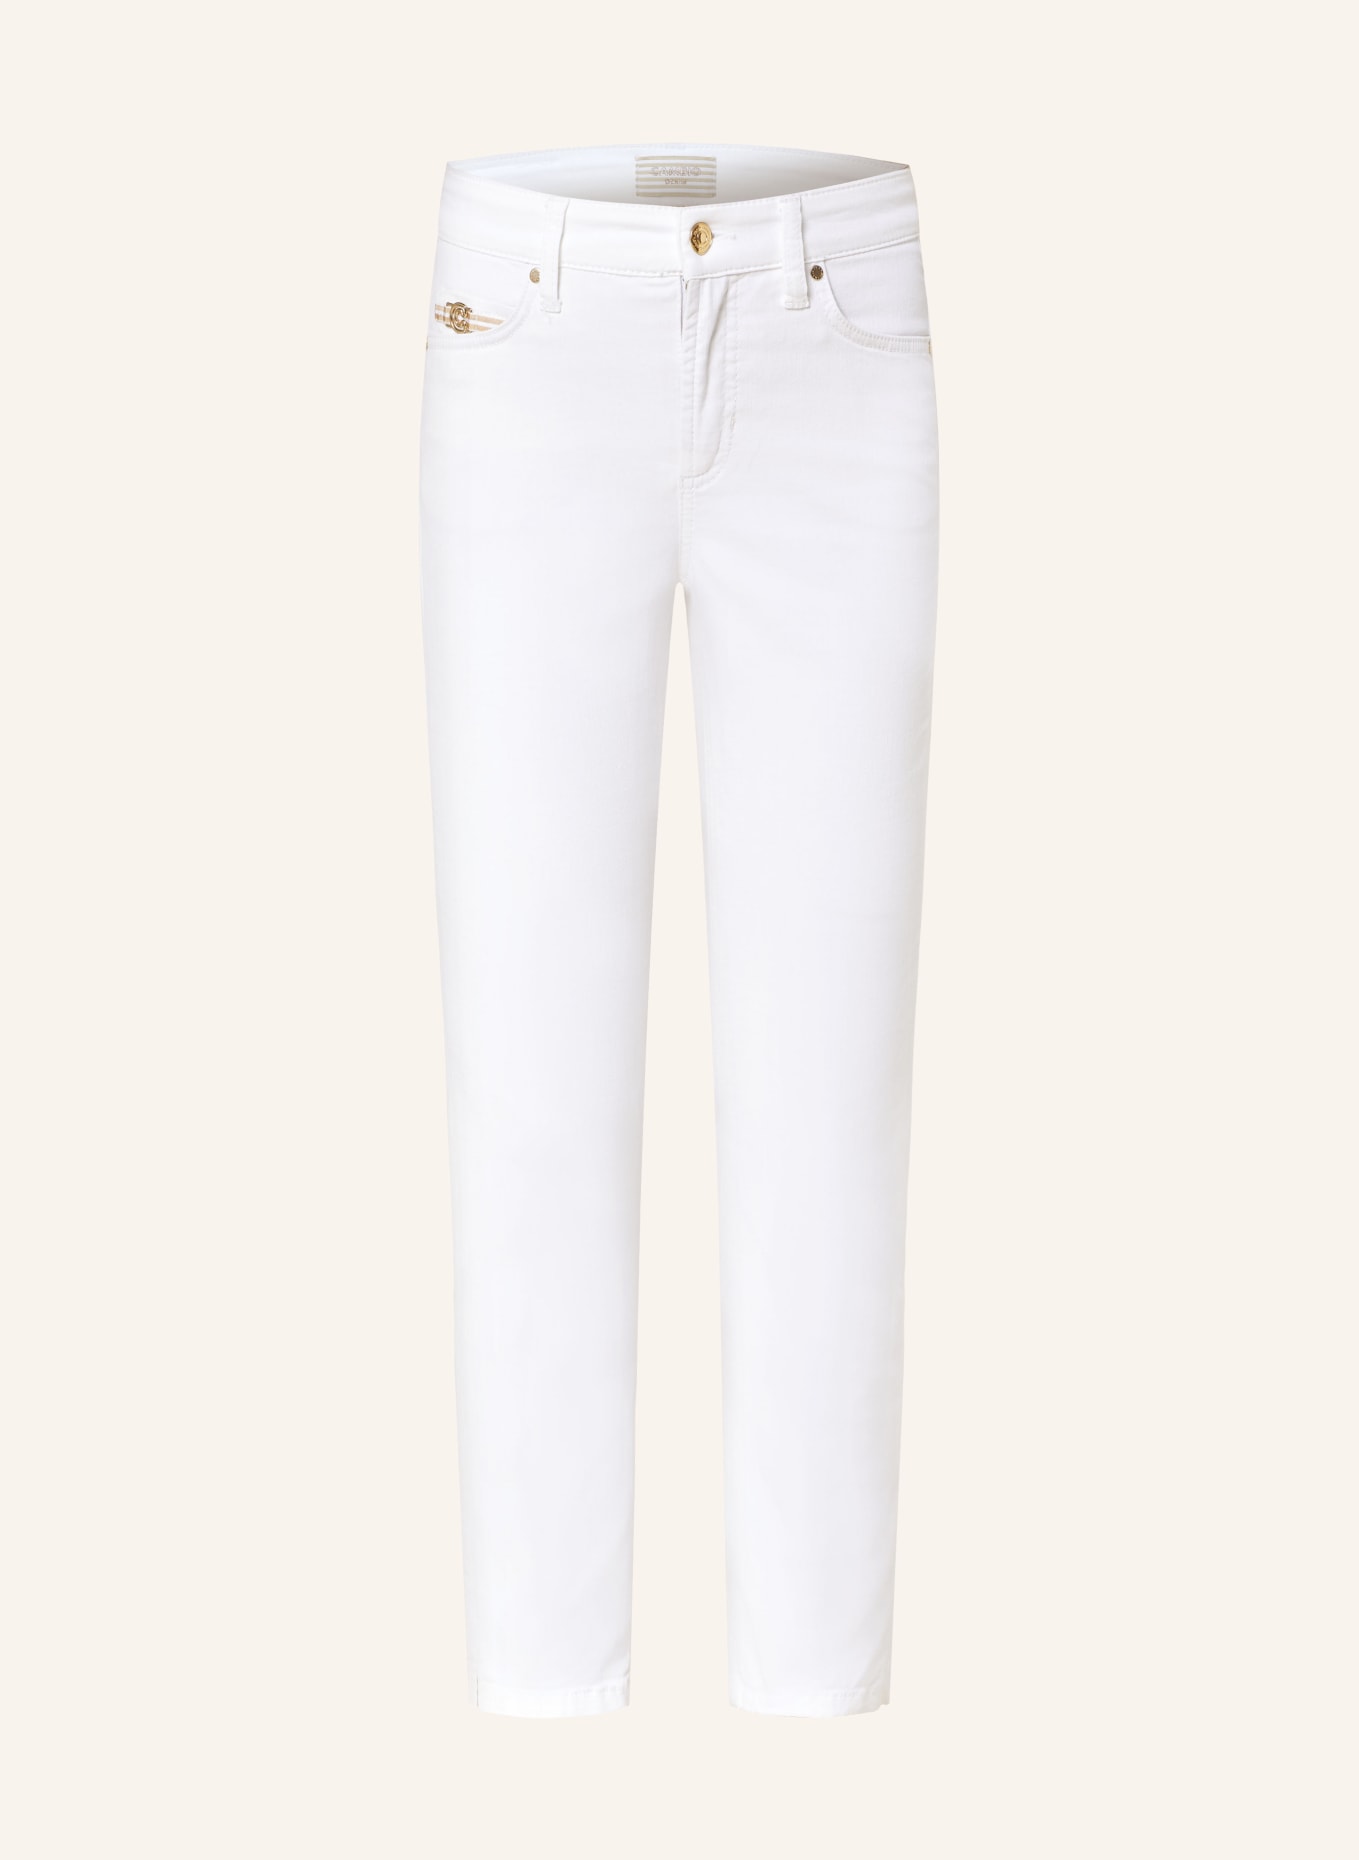 CAMBIO 7/8 jeans PIPER, Color: 5002 softwash (Image 1)